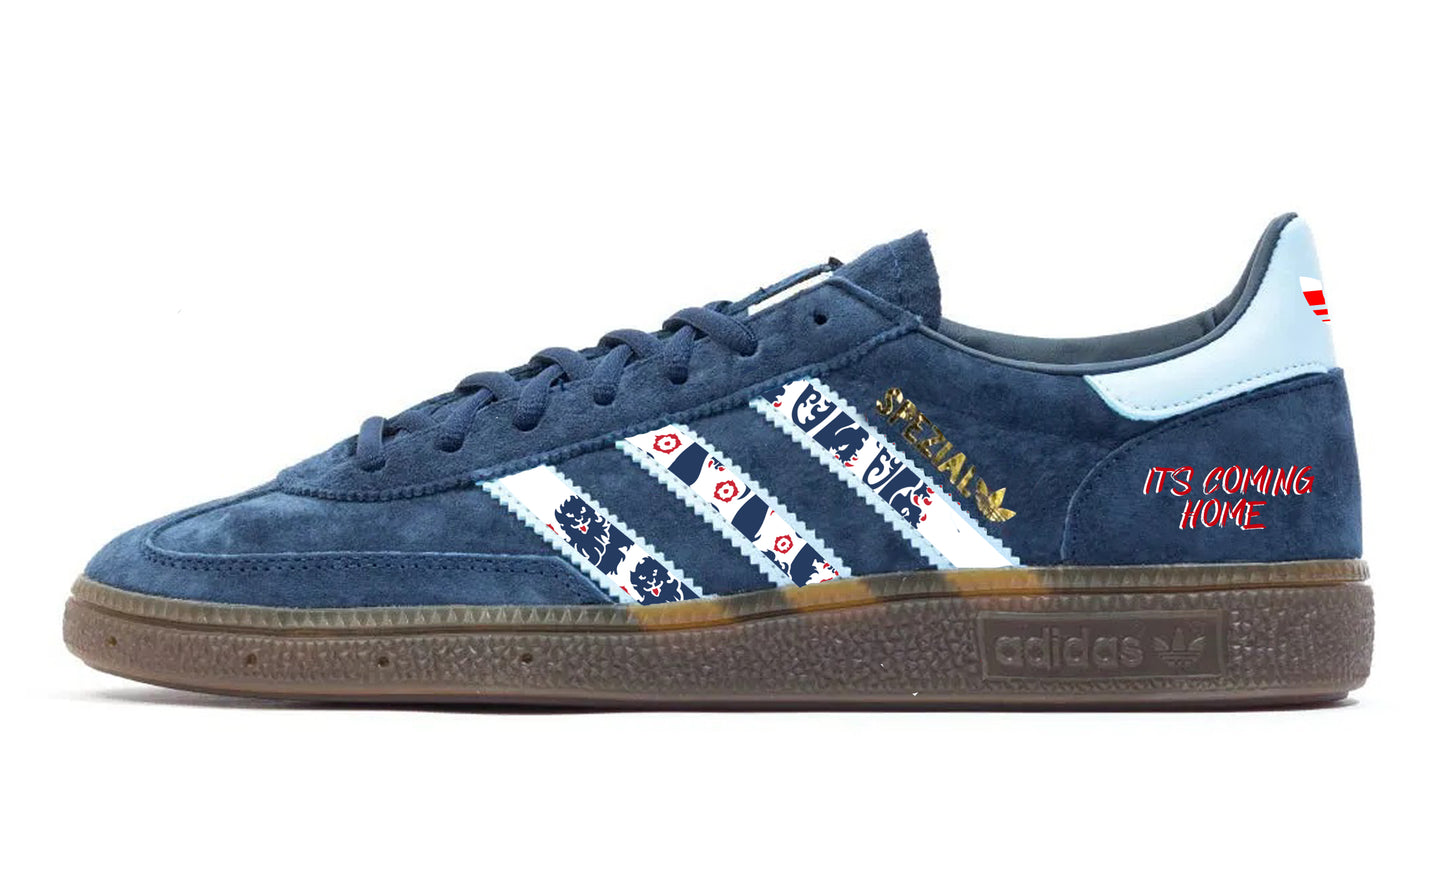 Limited edition Adidas England 3 lions dark blue spezial trainers / sneakers